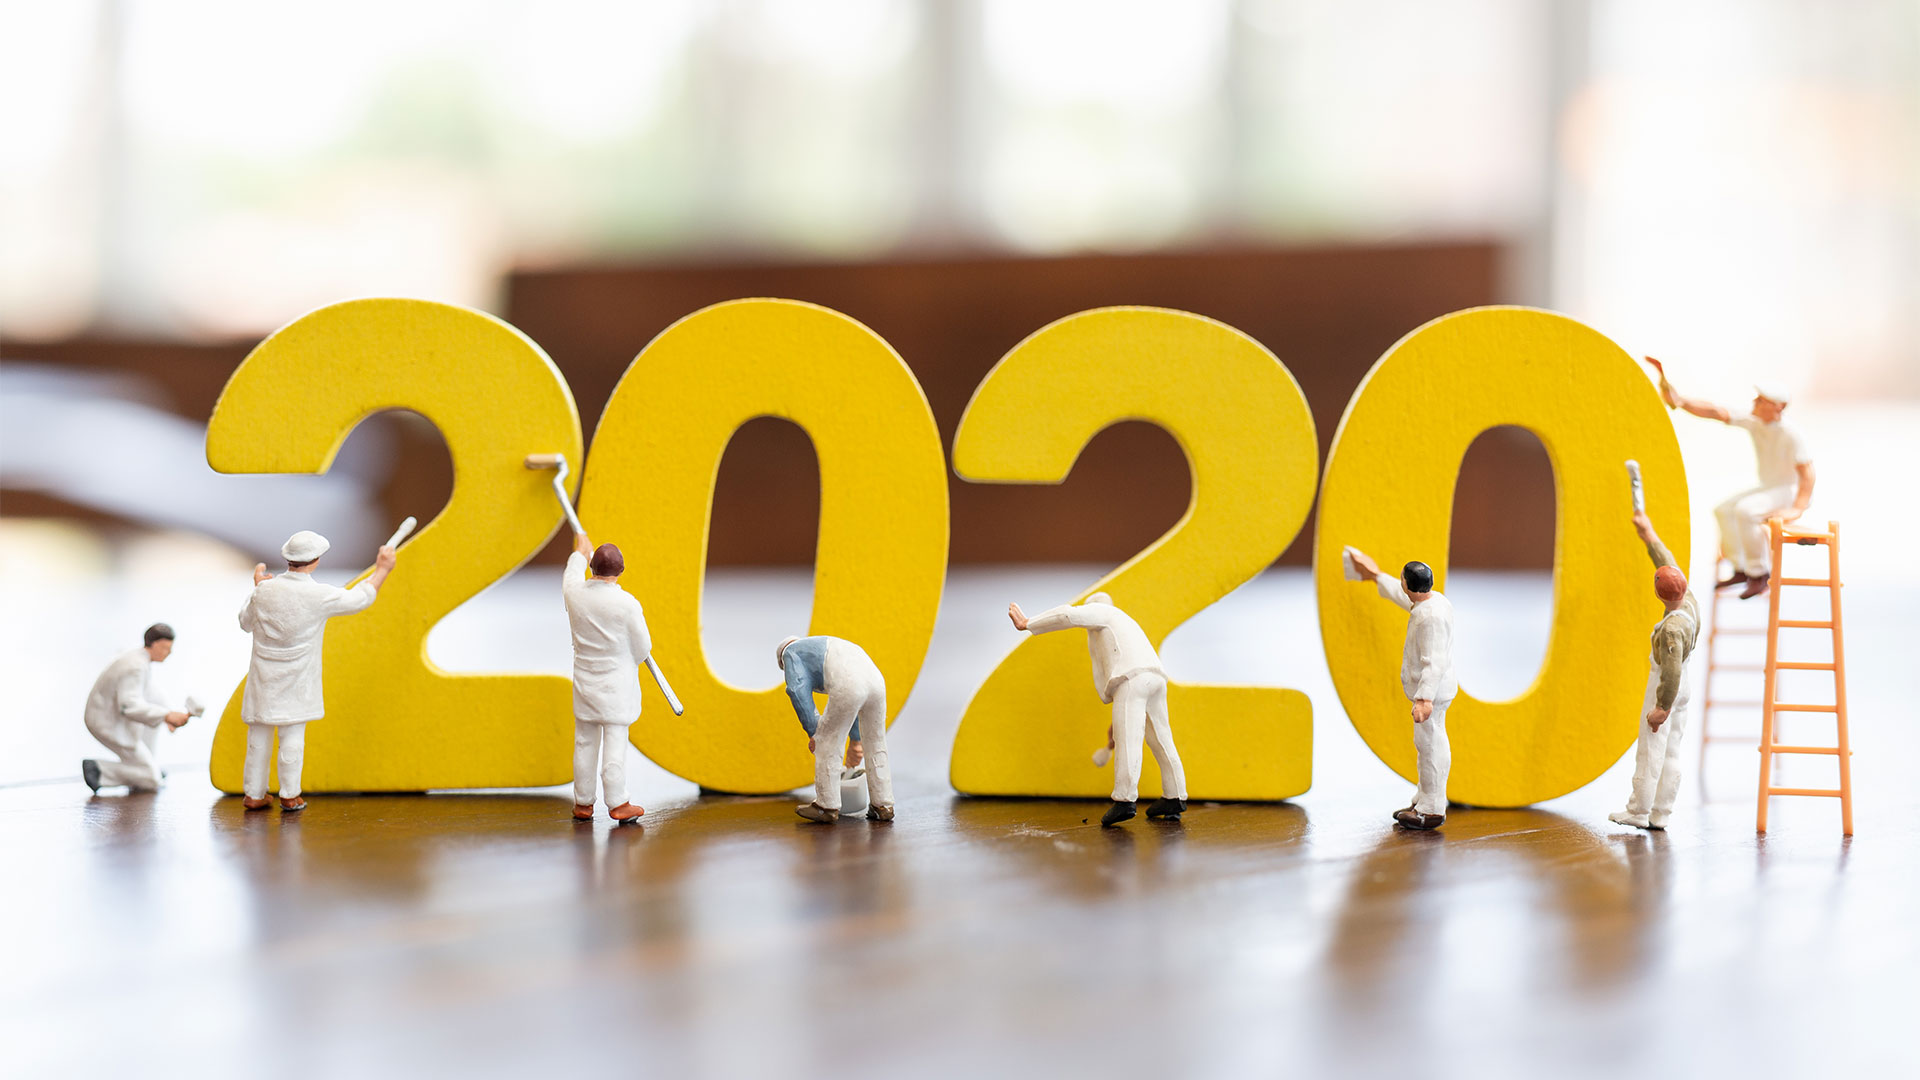 Miniature figurines of workers painting the number 2020